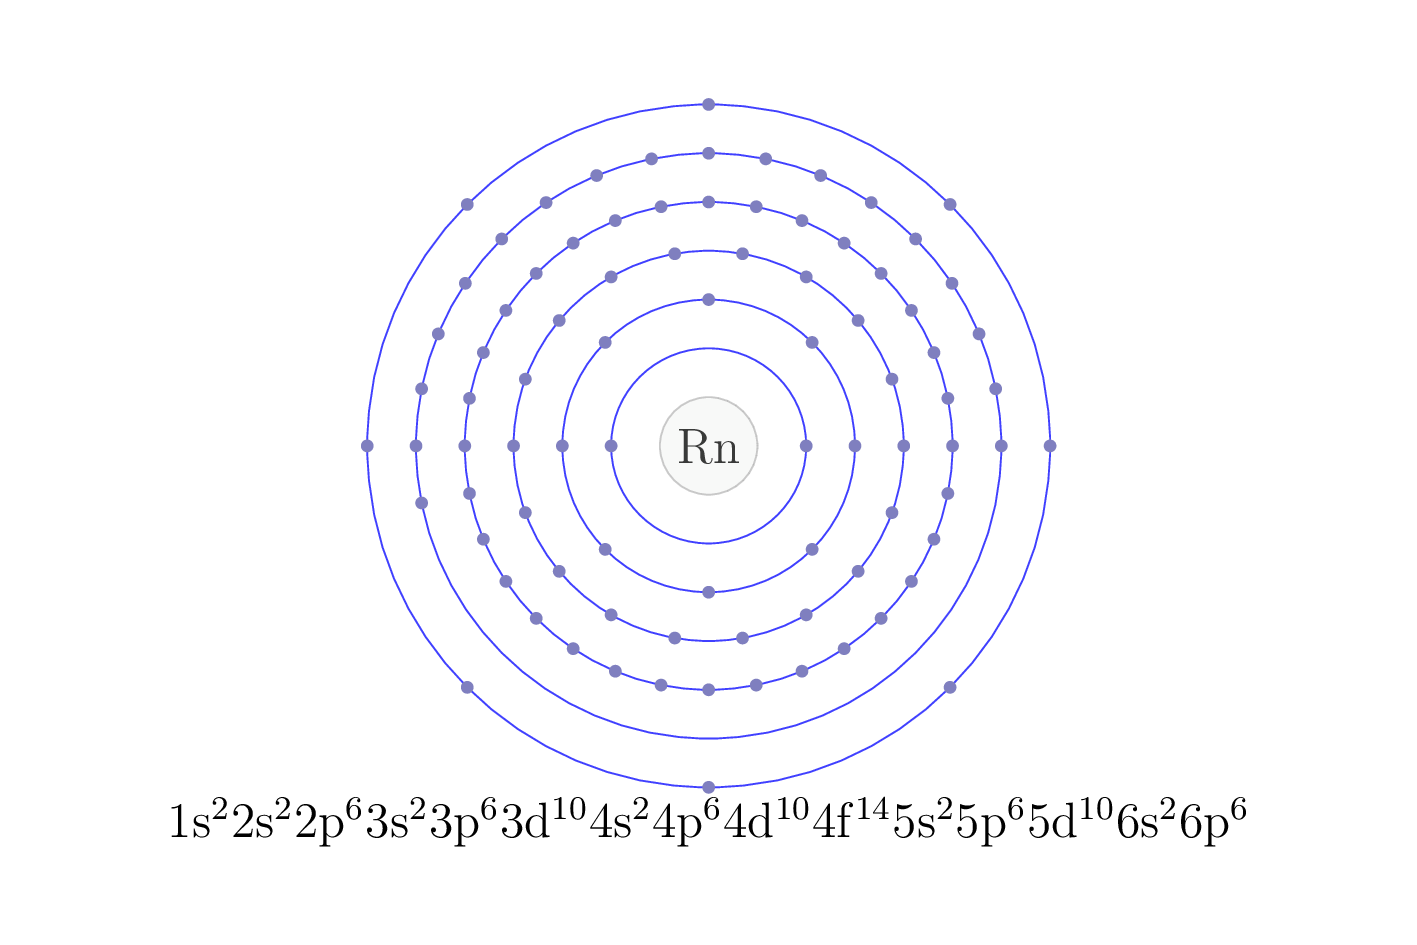 electron configuration of element Rn